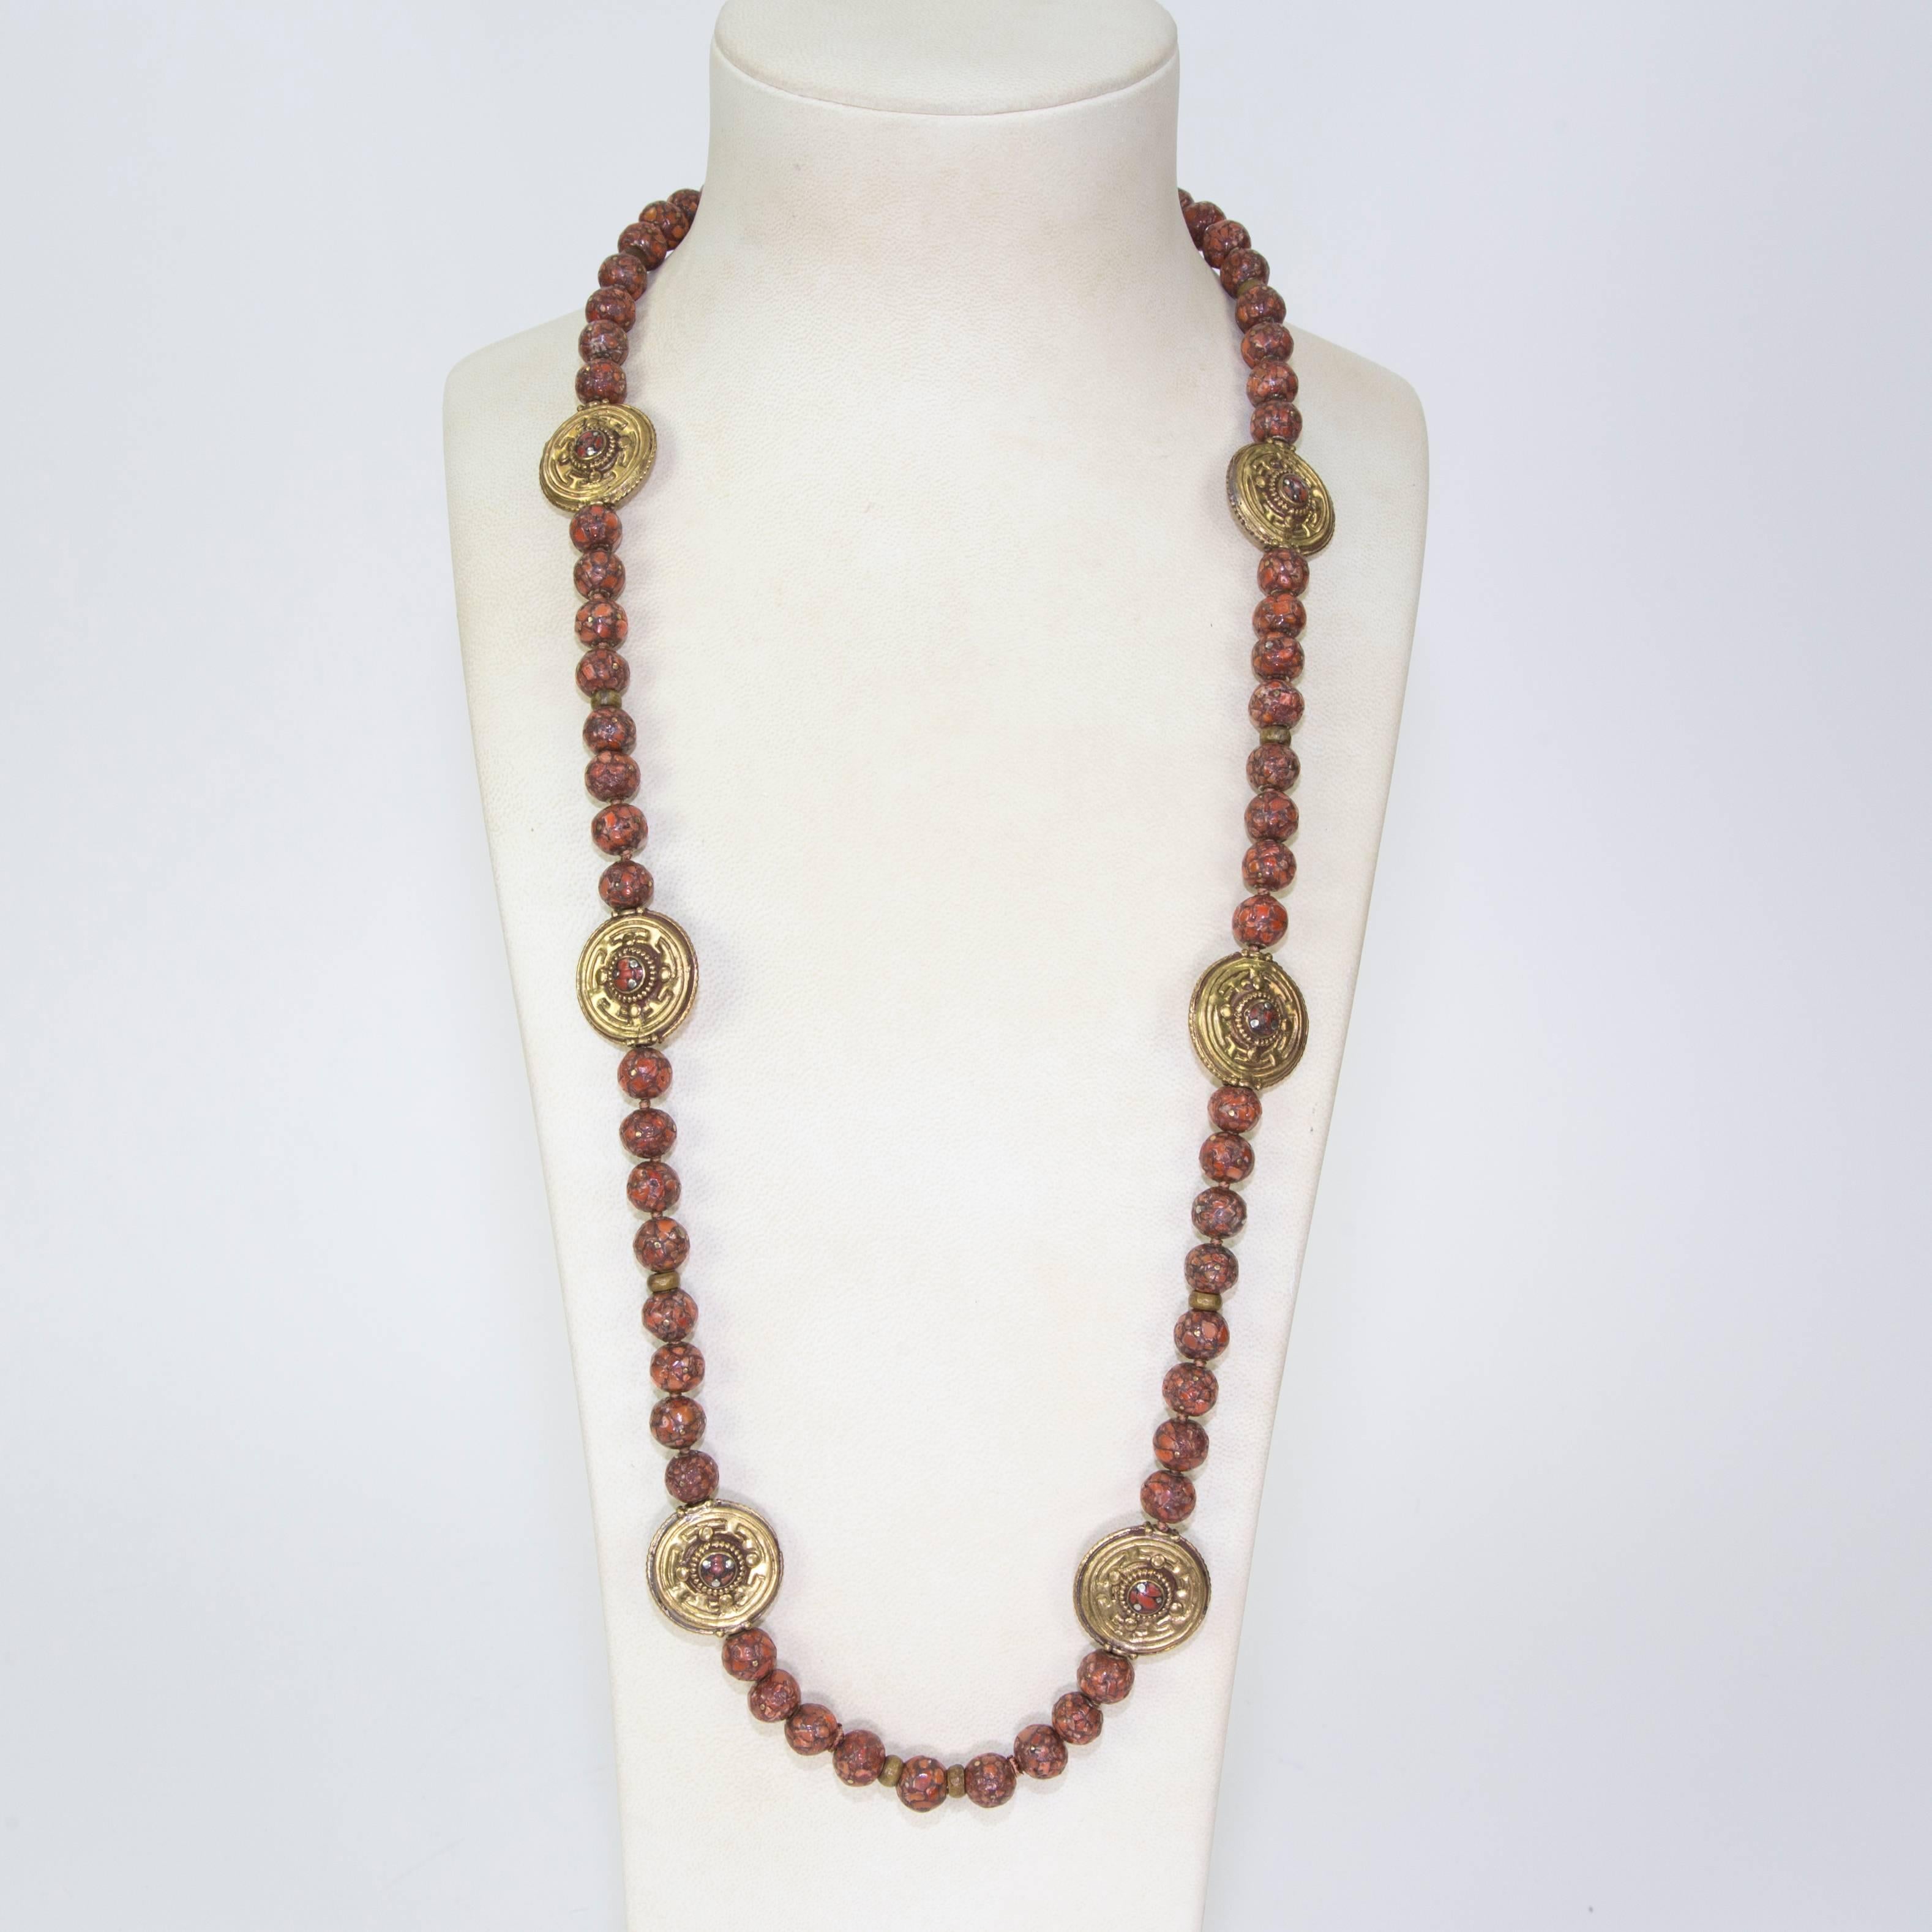 Simply Fabulous long Necklace featuring Old Tibetan reconstructed Coral Heirloom Beads (a gem material made by the fusing small particles of the genuine stone), inter-spaced with nine beautiful circular Gilt Silver beads centered by matching